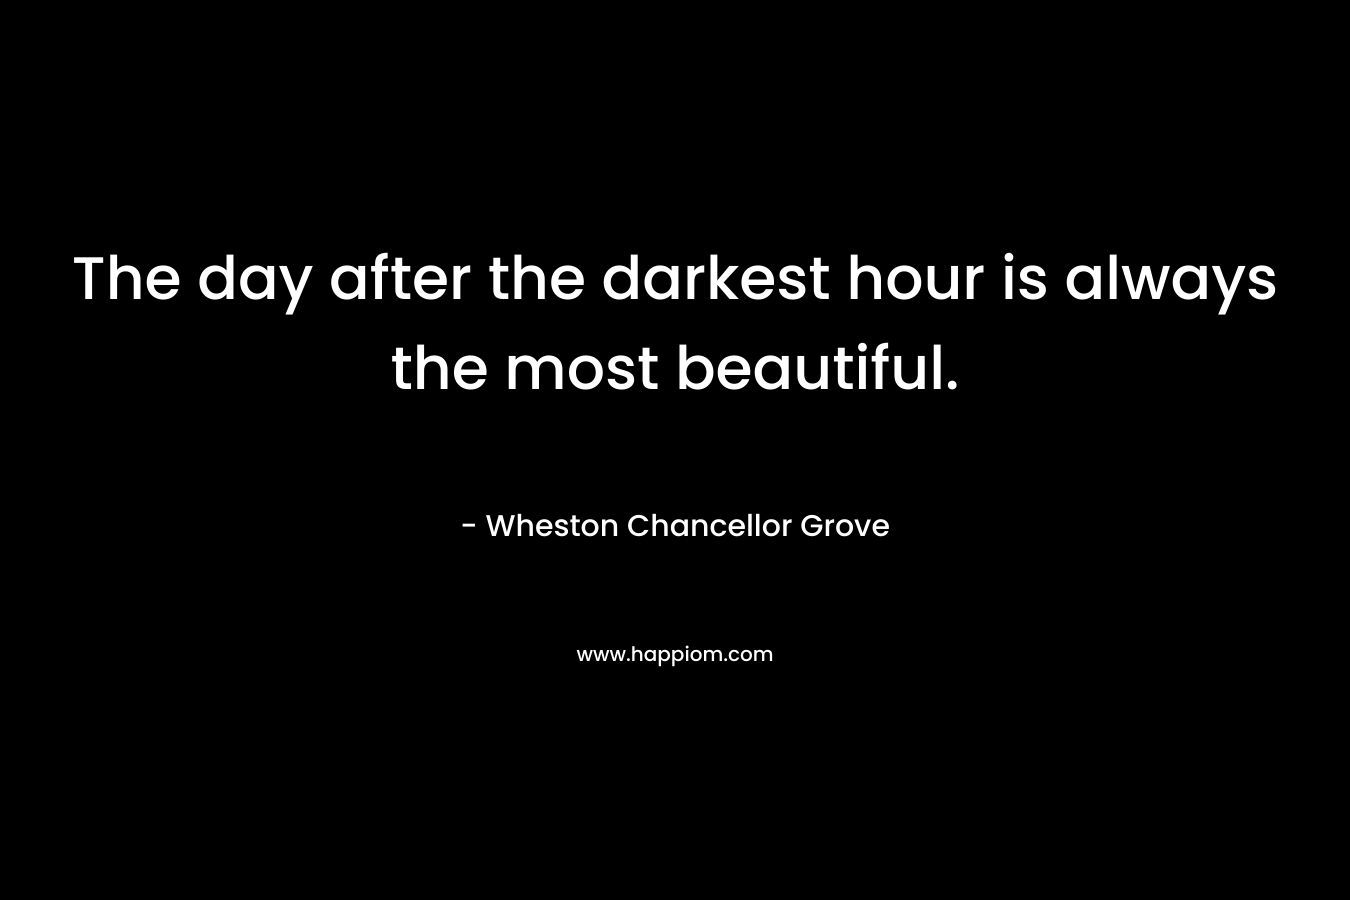 The day after the darkest hour is always the most beautiful. – Wheston Chancellor Grove